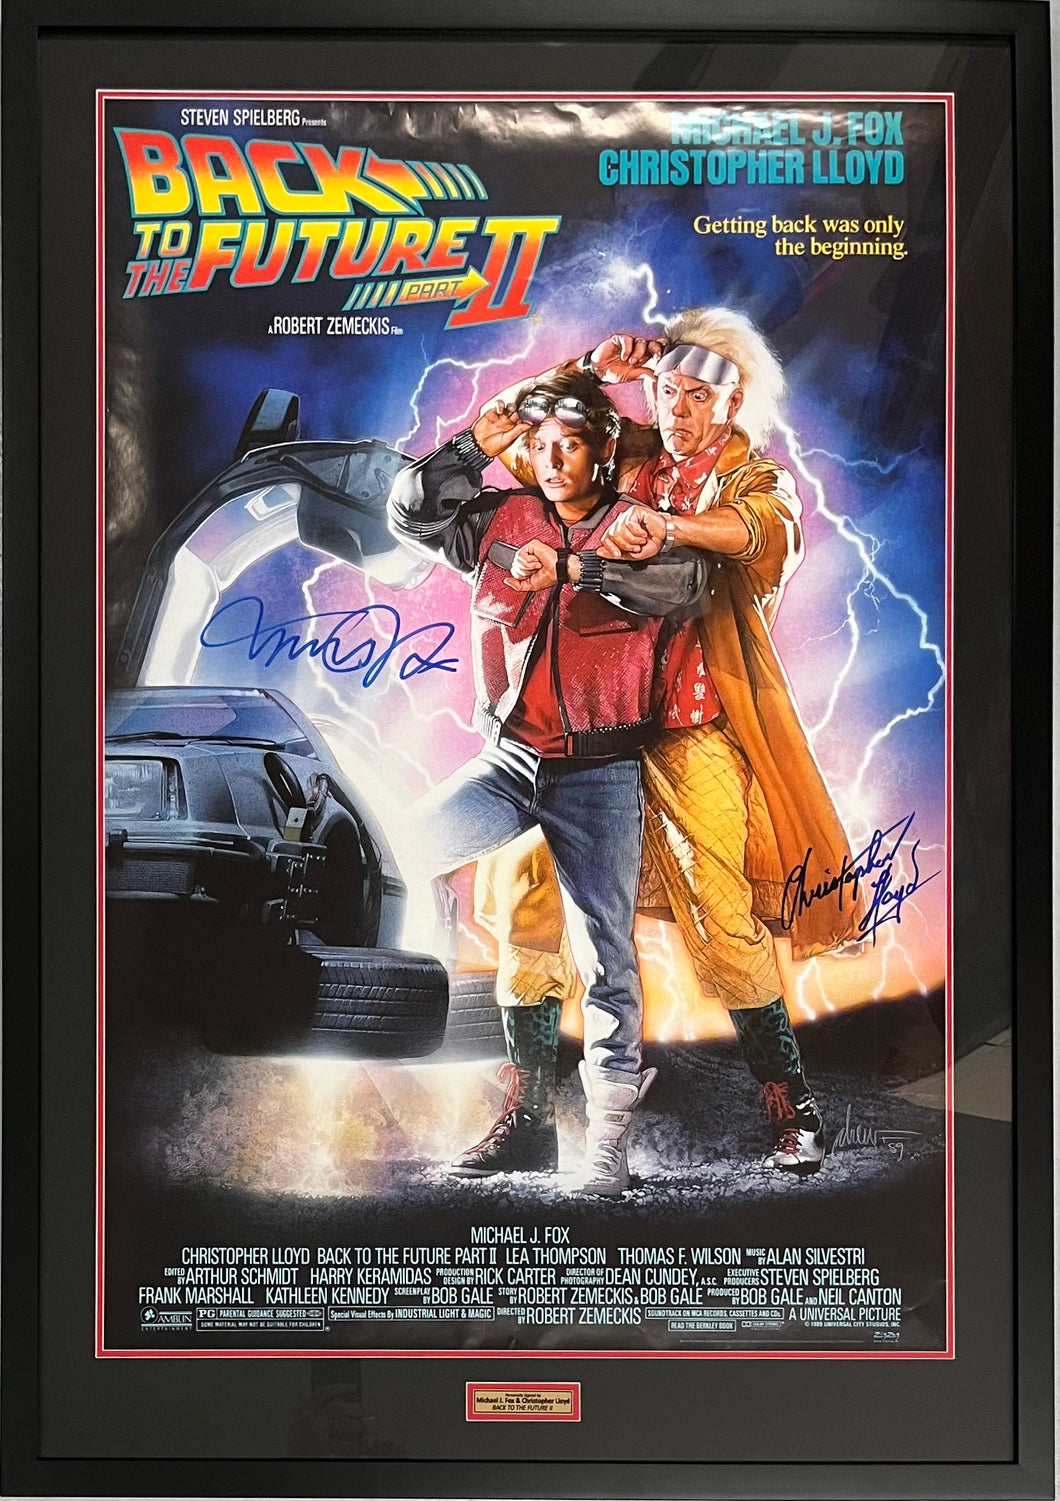 BACK TO THE FUTURE 2 - Michael J Fox & Christopher Lloyd Signed Movie Poster Display